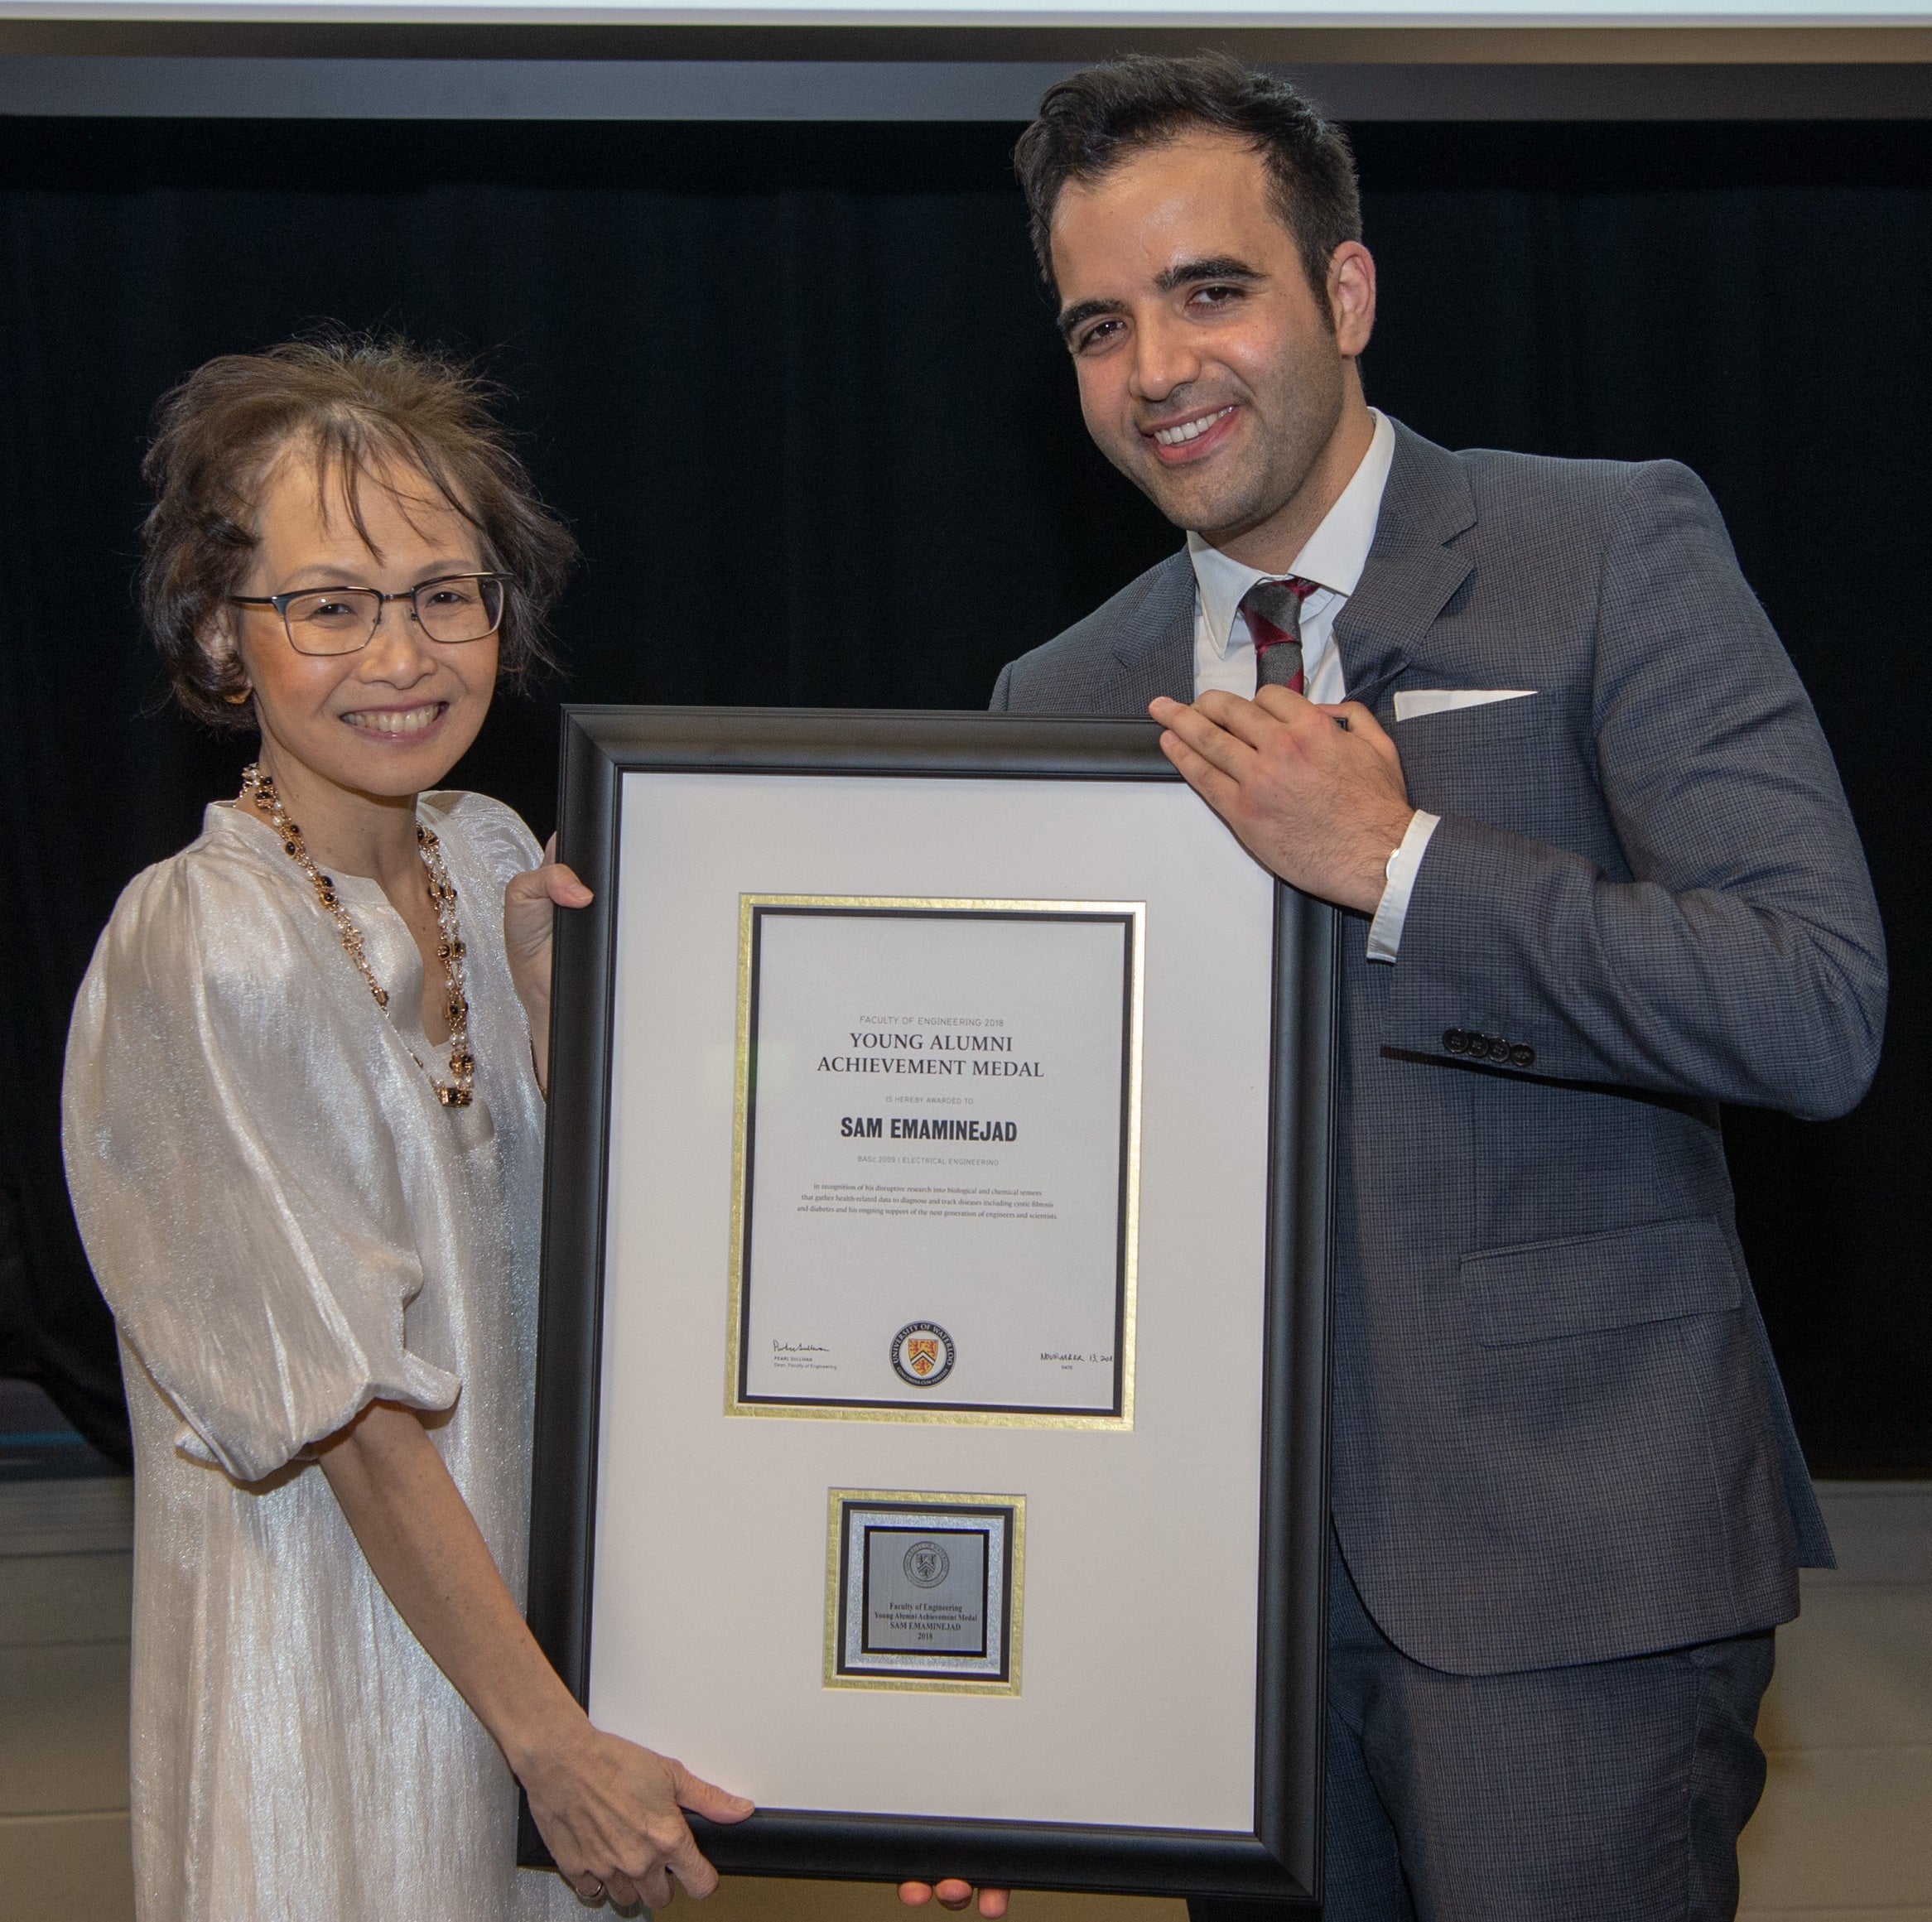 Sam Emaminejad (right) poses with Dean Pearl Sullivan with his award for achievement by young alumni. by